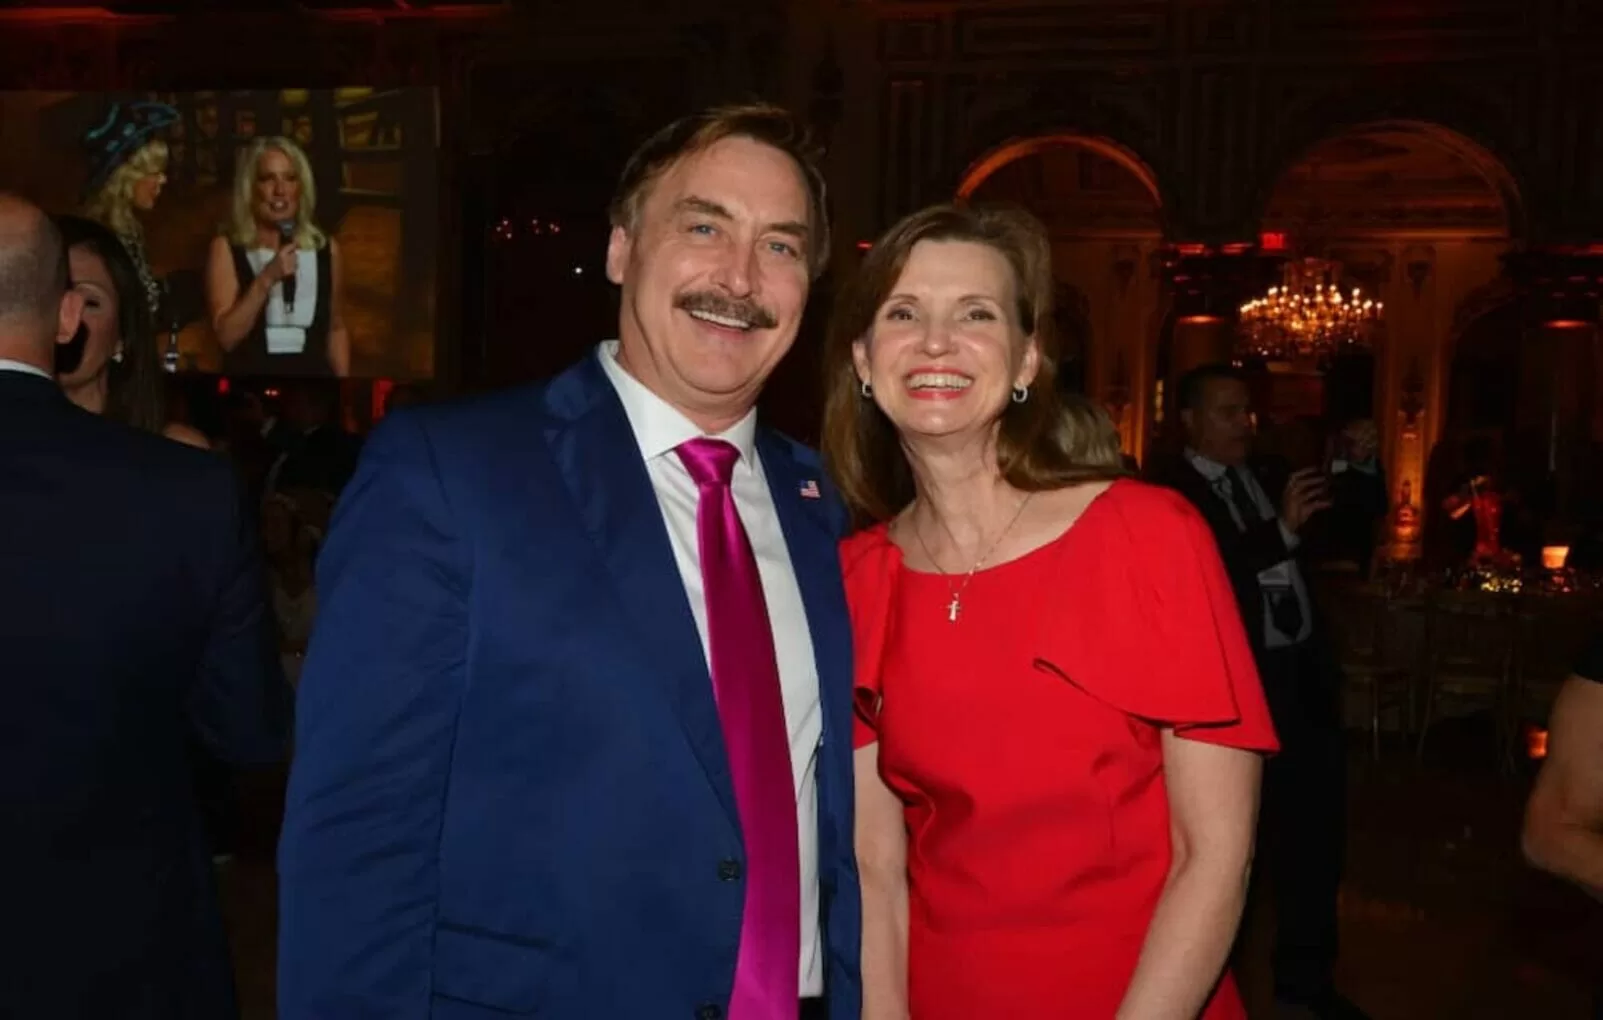 Dallas Yocum Biography: Mike Lindell Ex-Wife, Who Ended Their Marriage After Just One Month